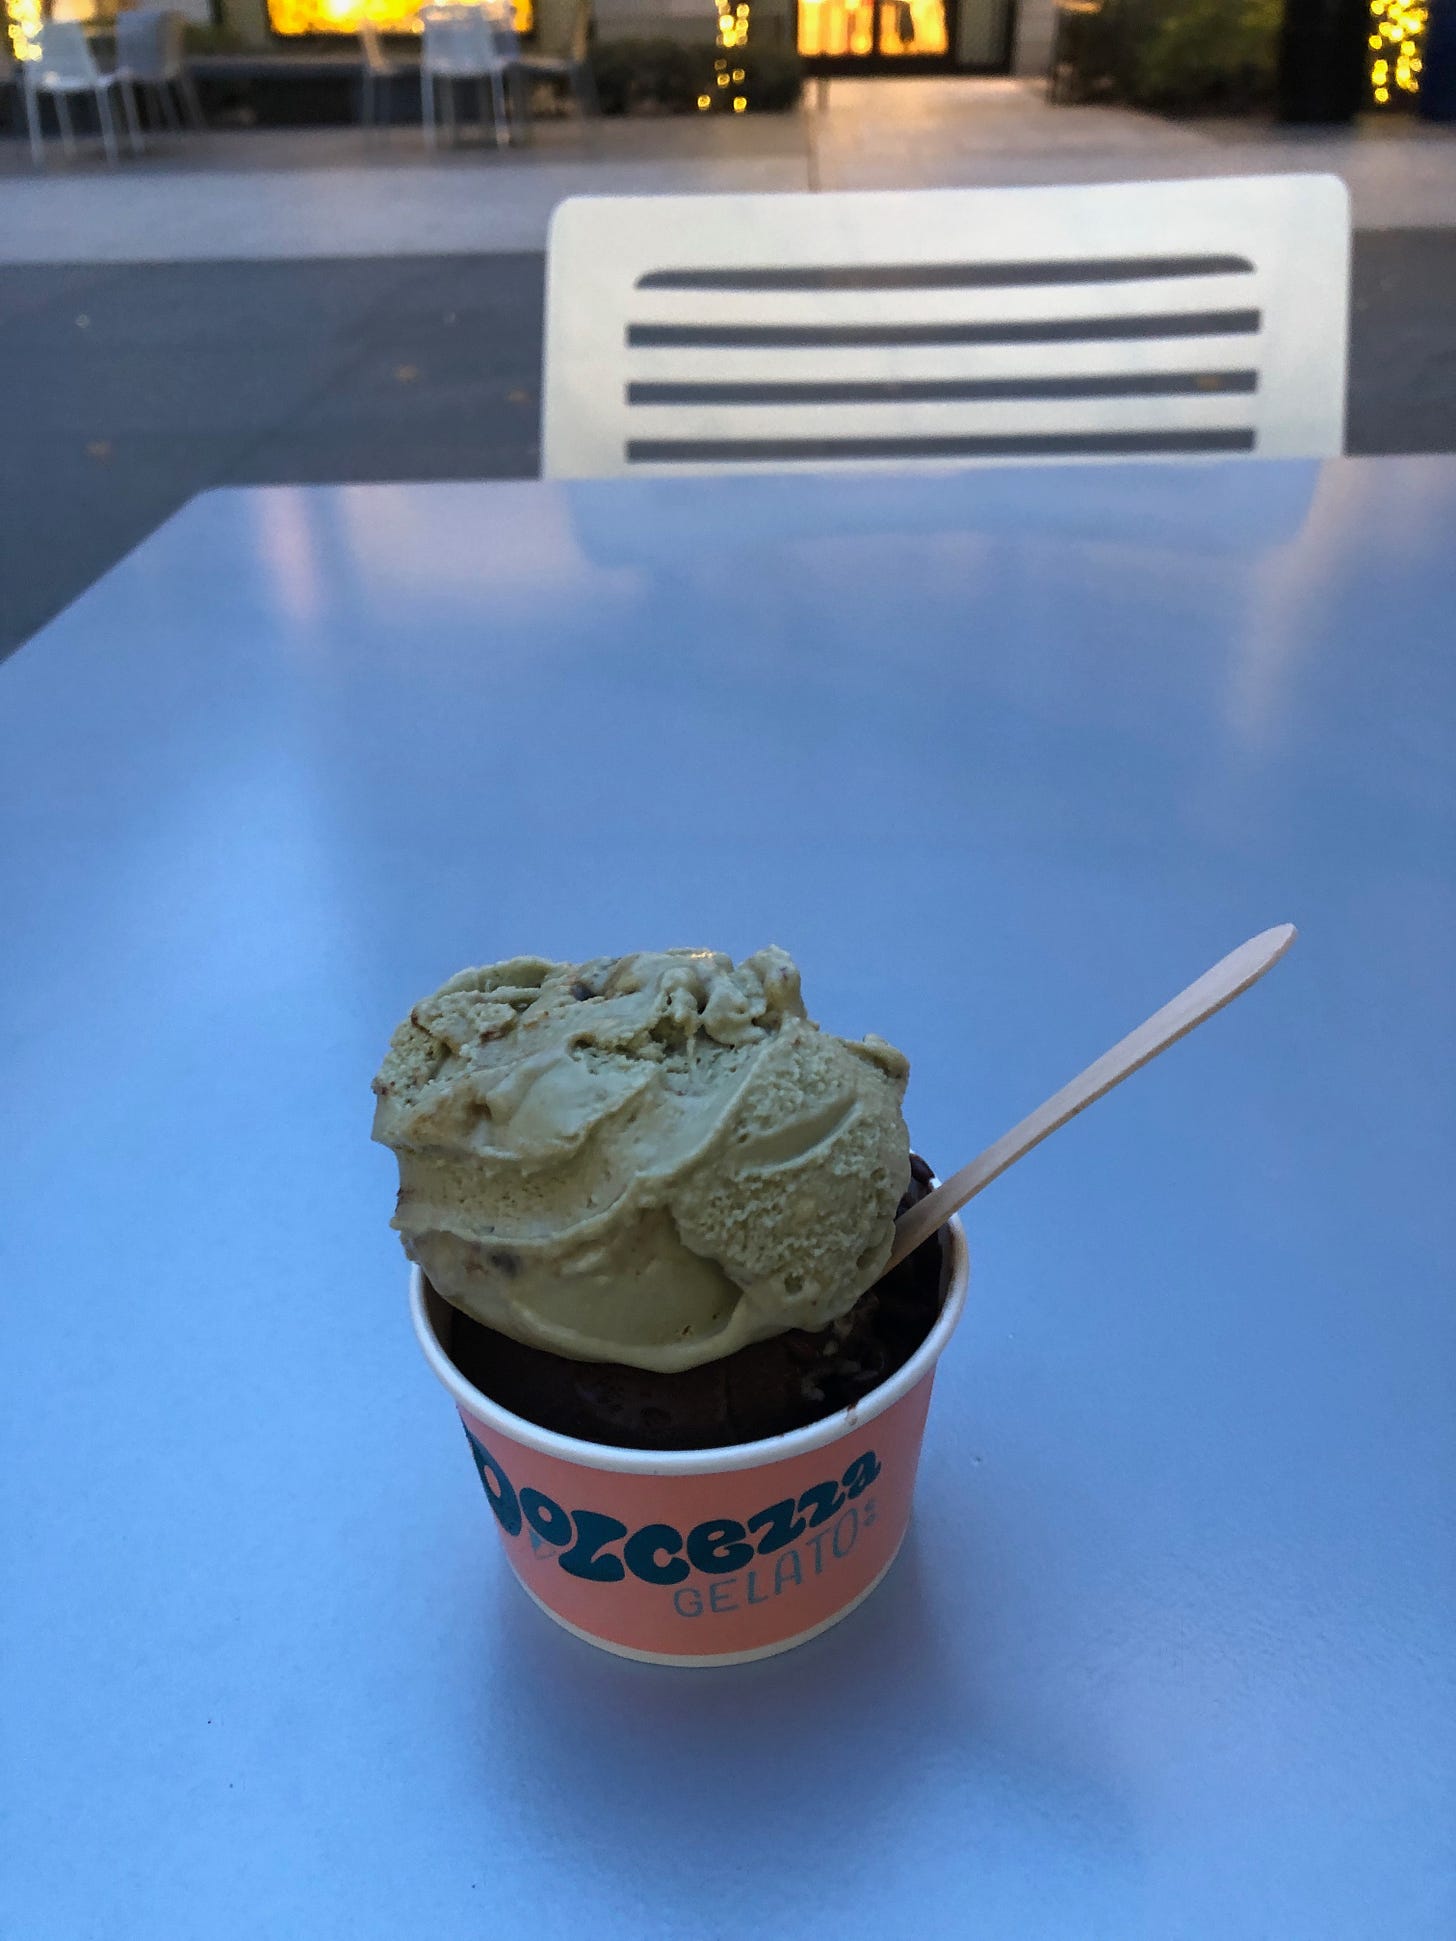 Two scoops of ice cream in a cup topped by a wooden spoon. The cup is on a small table facing a chair. In the background are brightly-lit stores and more outdoor tables and chairs.